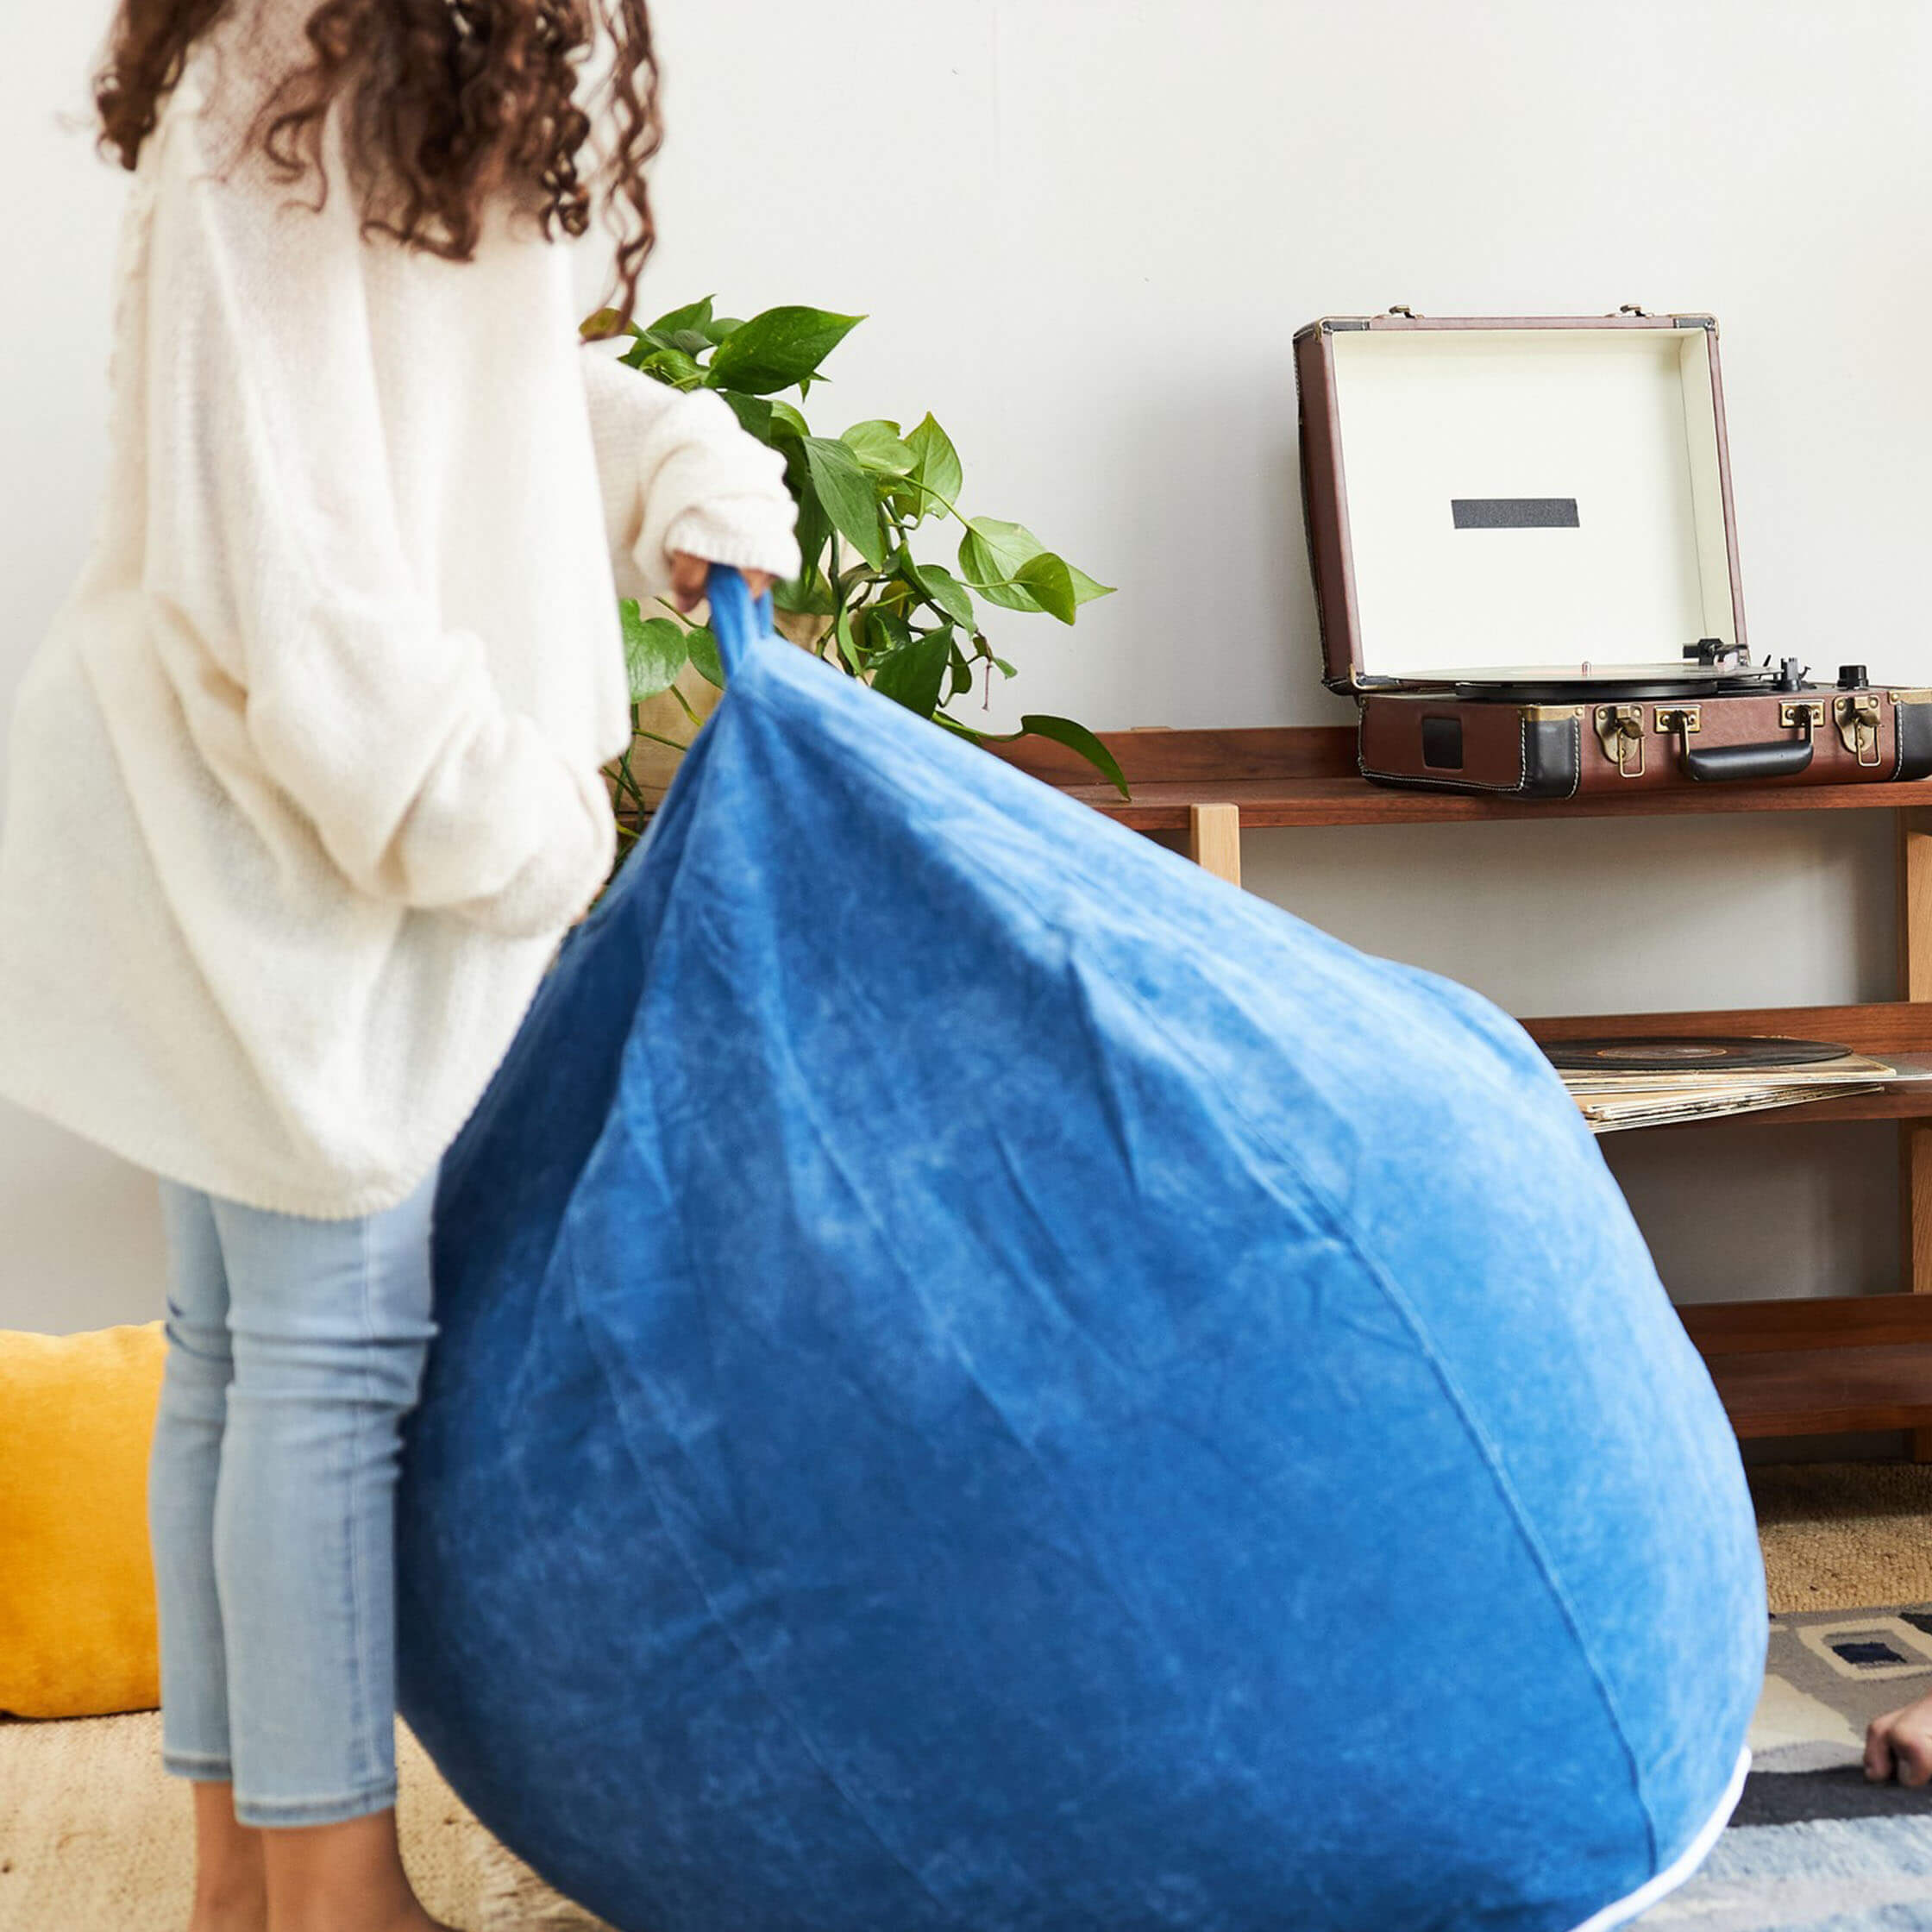 75L Natural Bean Bag Fill by Eco Beans - queenb